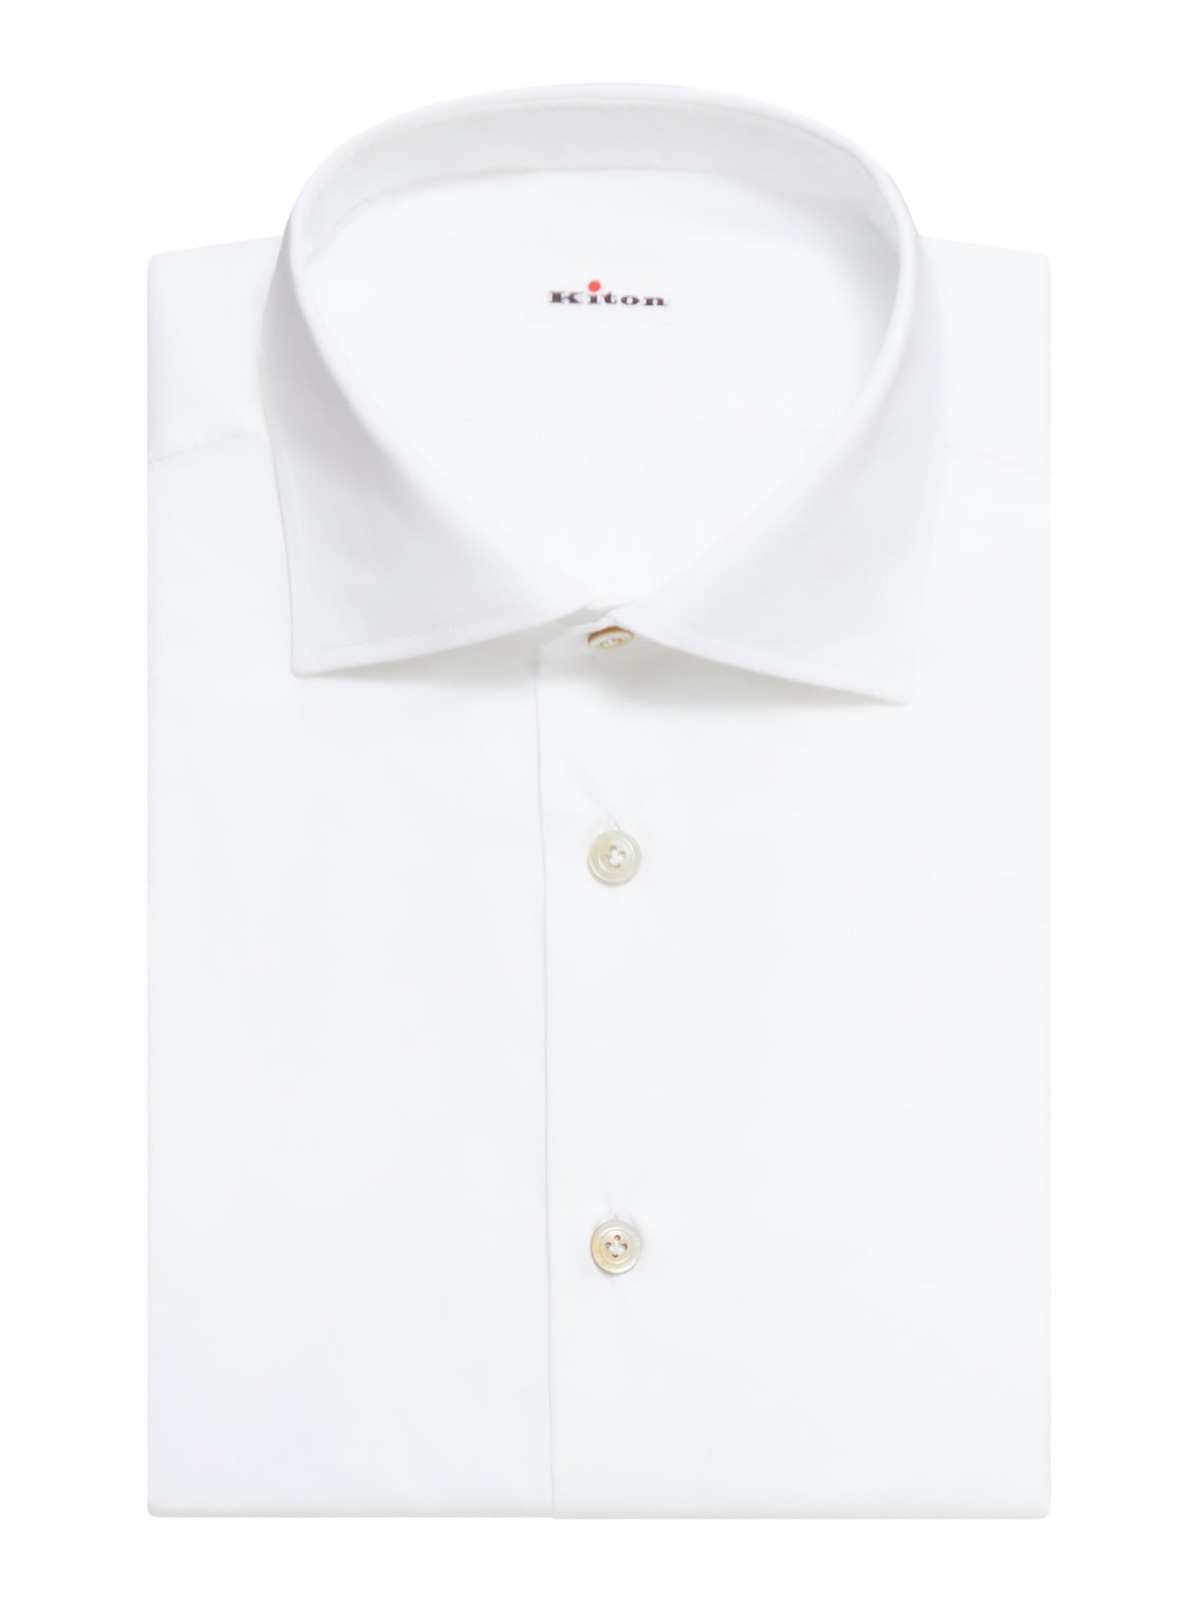 Men Shirt in White by Suitnegozi GOOFASH